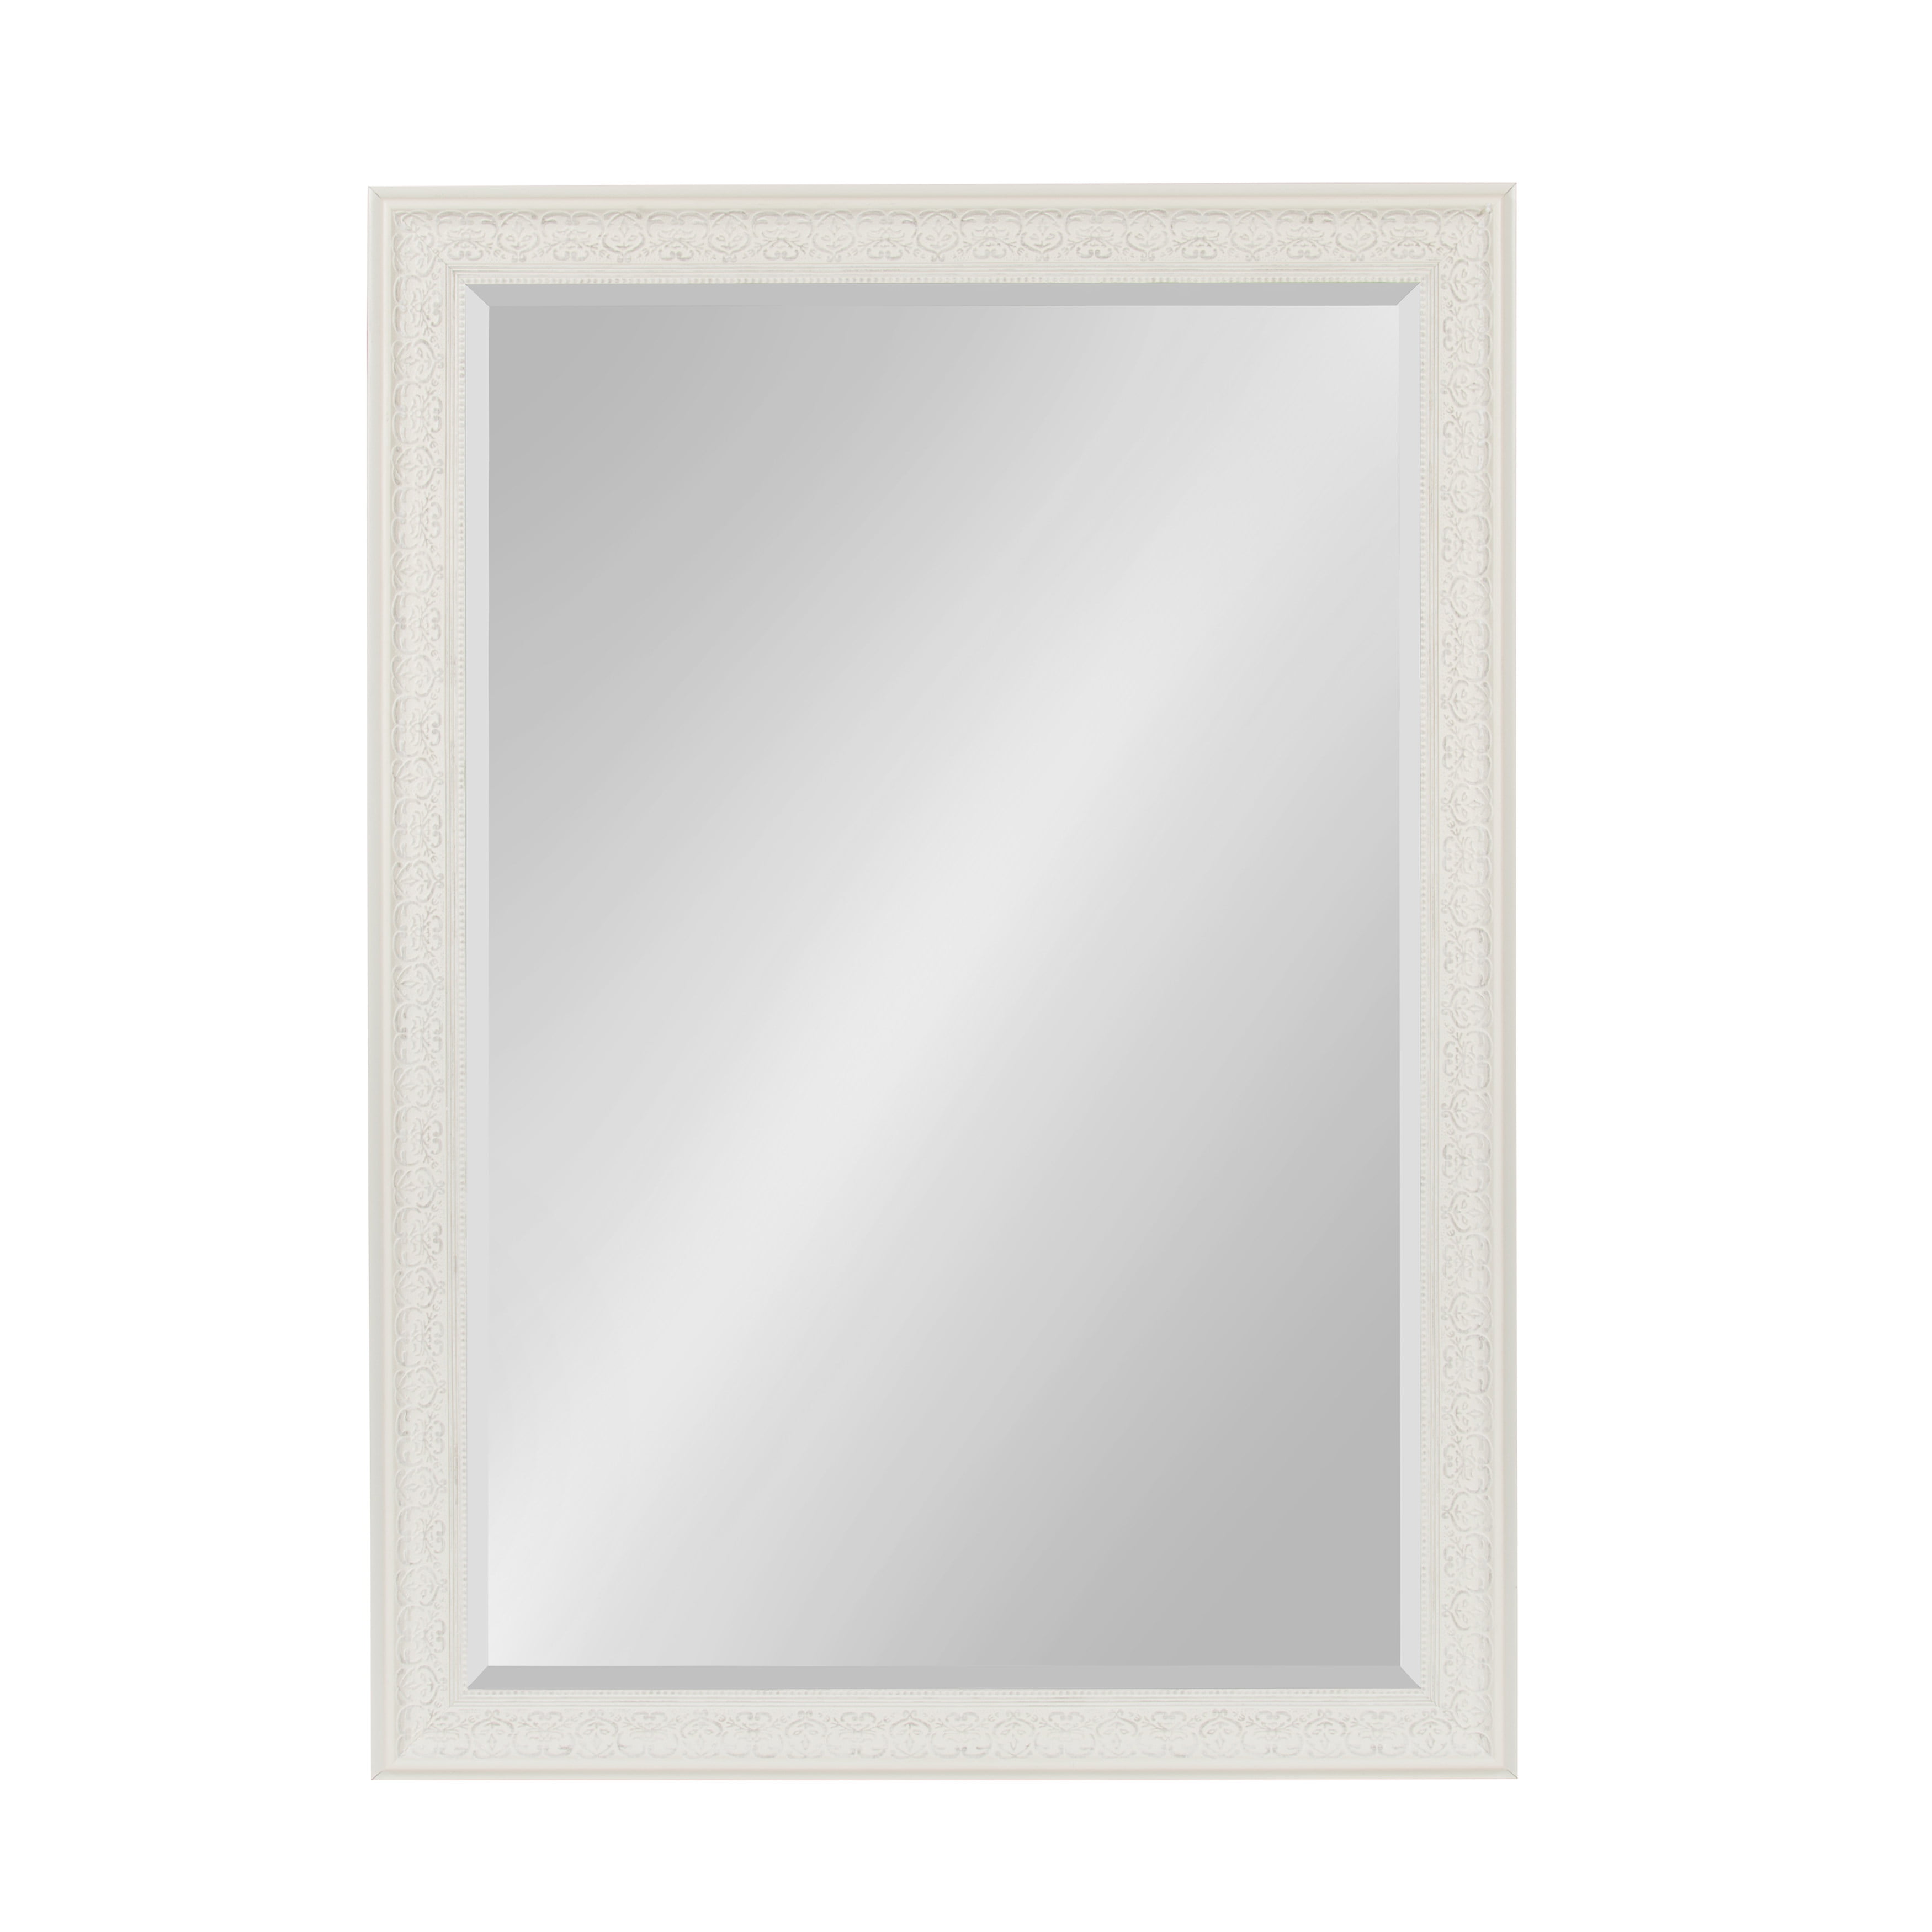 Kate and Laurel Whitley Framed Wall Mirror White 27.5x33.5 